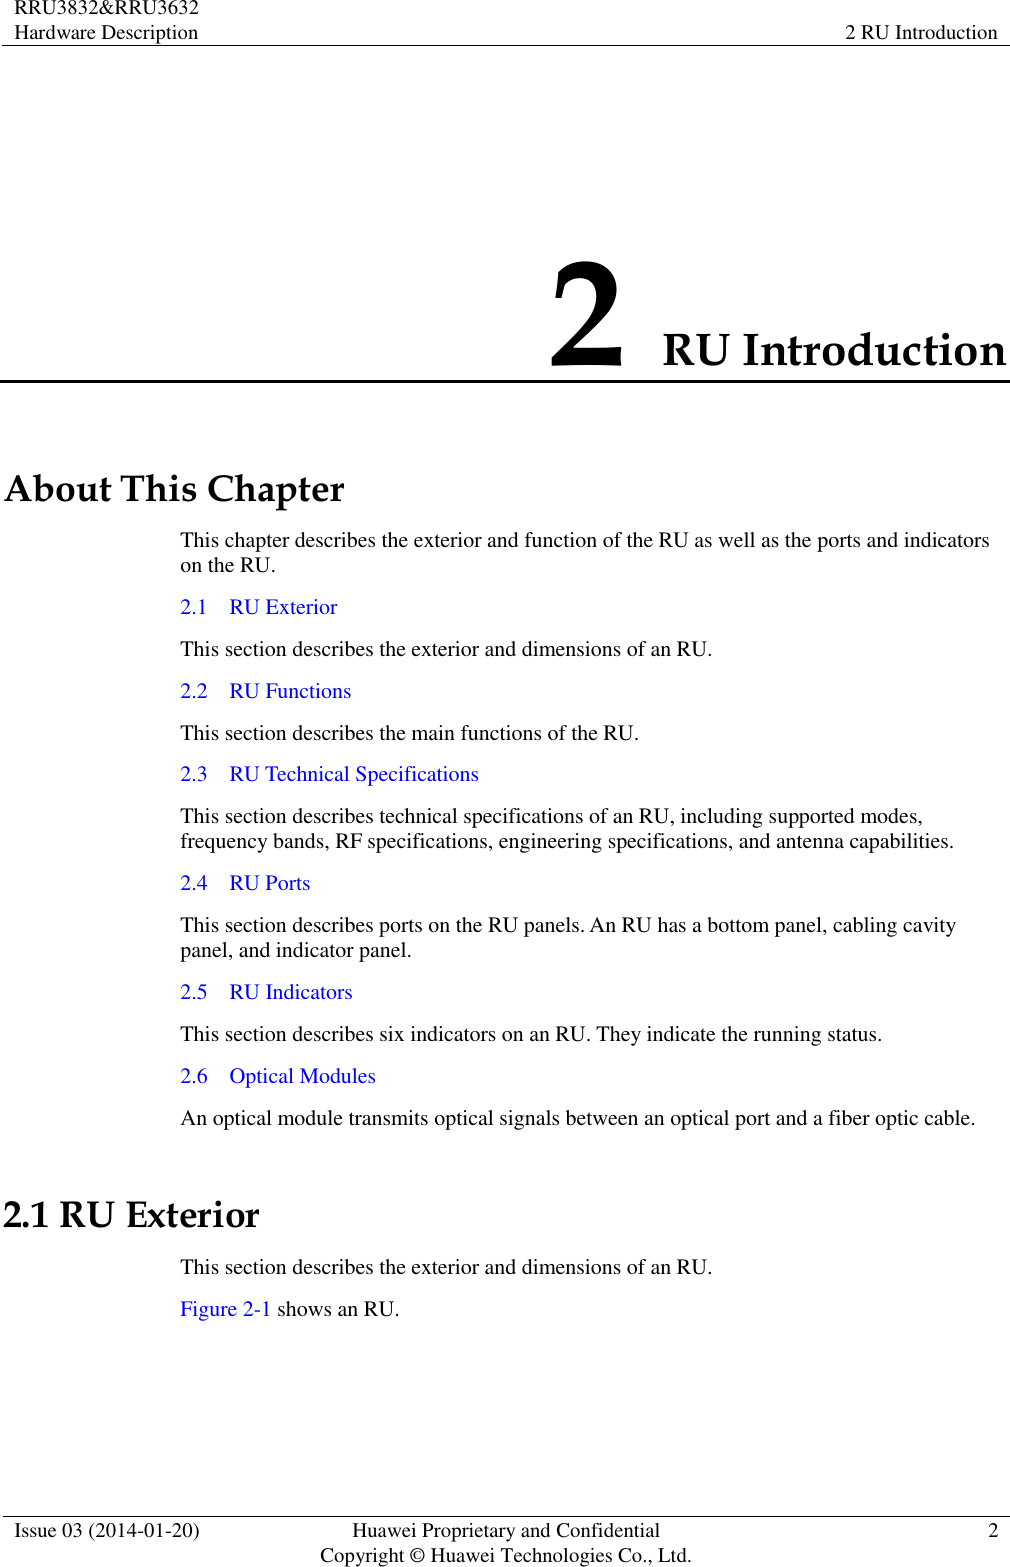 RRU3832&amp;RRU3632 Hardware Description 2 RU Introduction  Issue 03 (2014-01-20) Huawei Proprietary and Confidential                                     Copyright © Huawei Technologies Co., Ltd. 2  2 RU Introduction About This Chapter This chapter describes the exterior and function of the RU as well as the ports and indicators on the RU. 2.1    RU Exterior This section describes the exterior and dimensions of an RU. 2.2    RU Functions This section describes the main functions of the RU. 2.3    RU Technical Specifications This section describes technical specifications of an RU, including supported modes, frequency bands, RF specifications, engineering specifications, and antenna capabilities. 2.4    RU Ports This section describes ports on the RU panels. An RU has a bottom panel, cabling cavity panel, and indicator panel. 2.5    RU Indicators This section describes six indicators on an RU. They indicate the running status.   2.6    Optical Modules An optical module transmits optical signals between an optical port and a fiber optic cable. 2.1 RU Exterior This section describes the exterior and dimensions of an RU. Figure 2-1 shows an RU.   